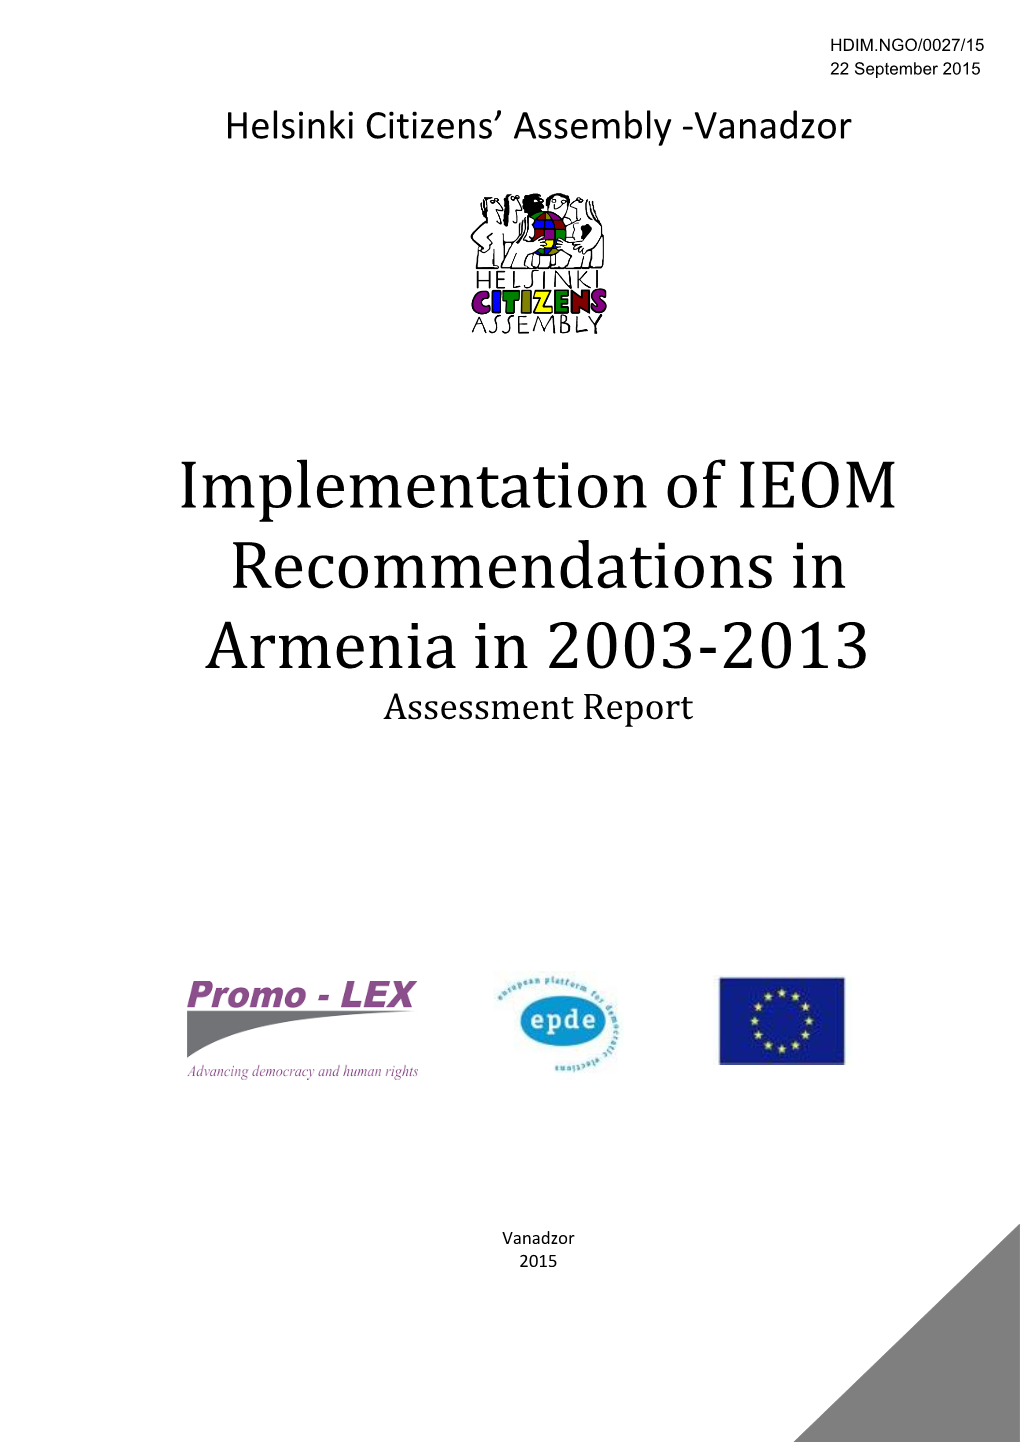 Implementation of IEOM Recommendations in Armenia in 2003-2013 Assessment Report